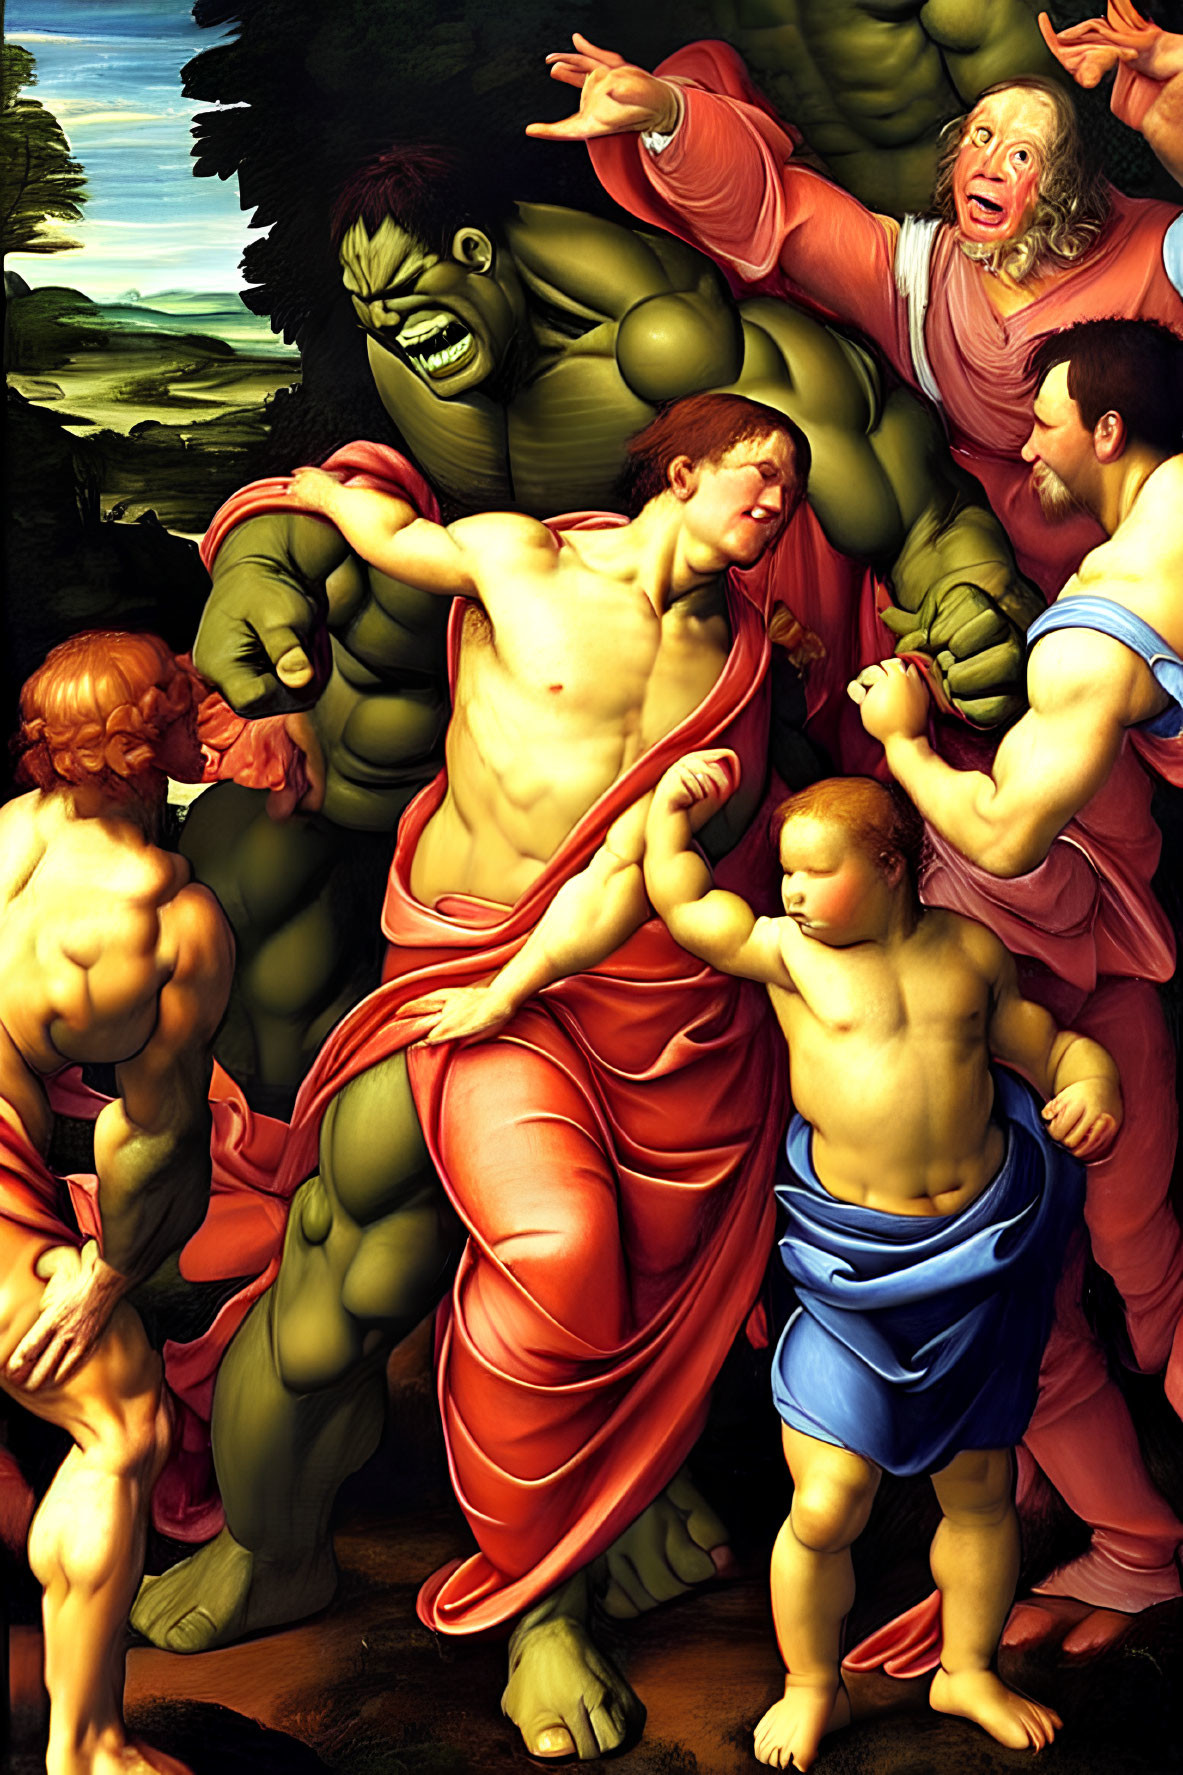 Classical painting merged with Marvel's Hulk in dramatic scene